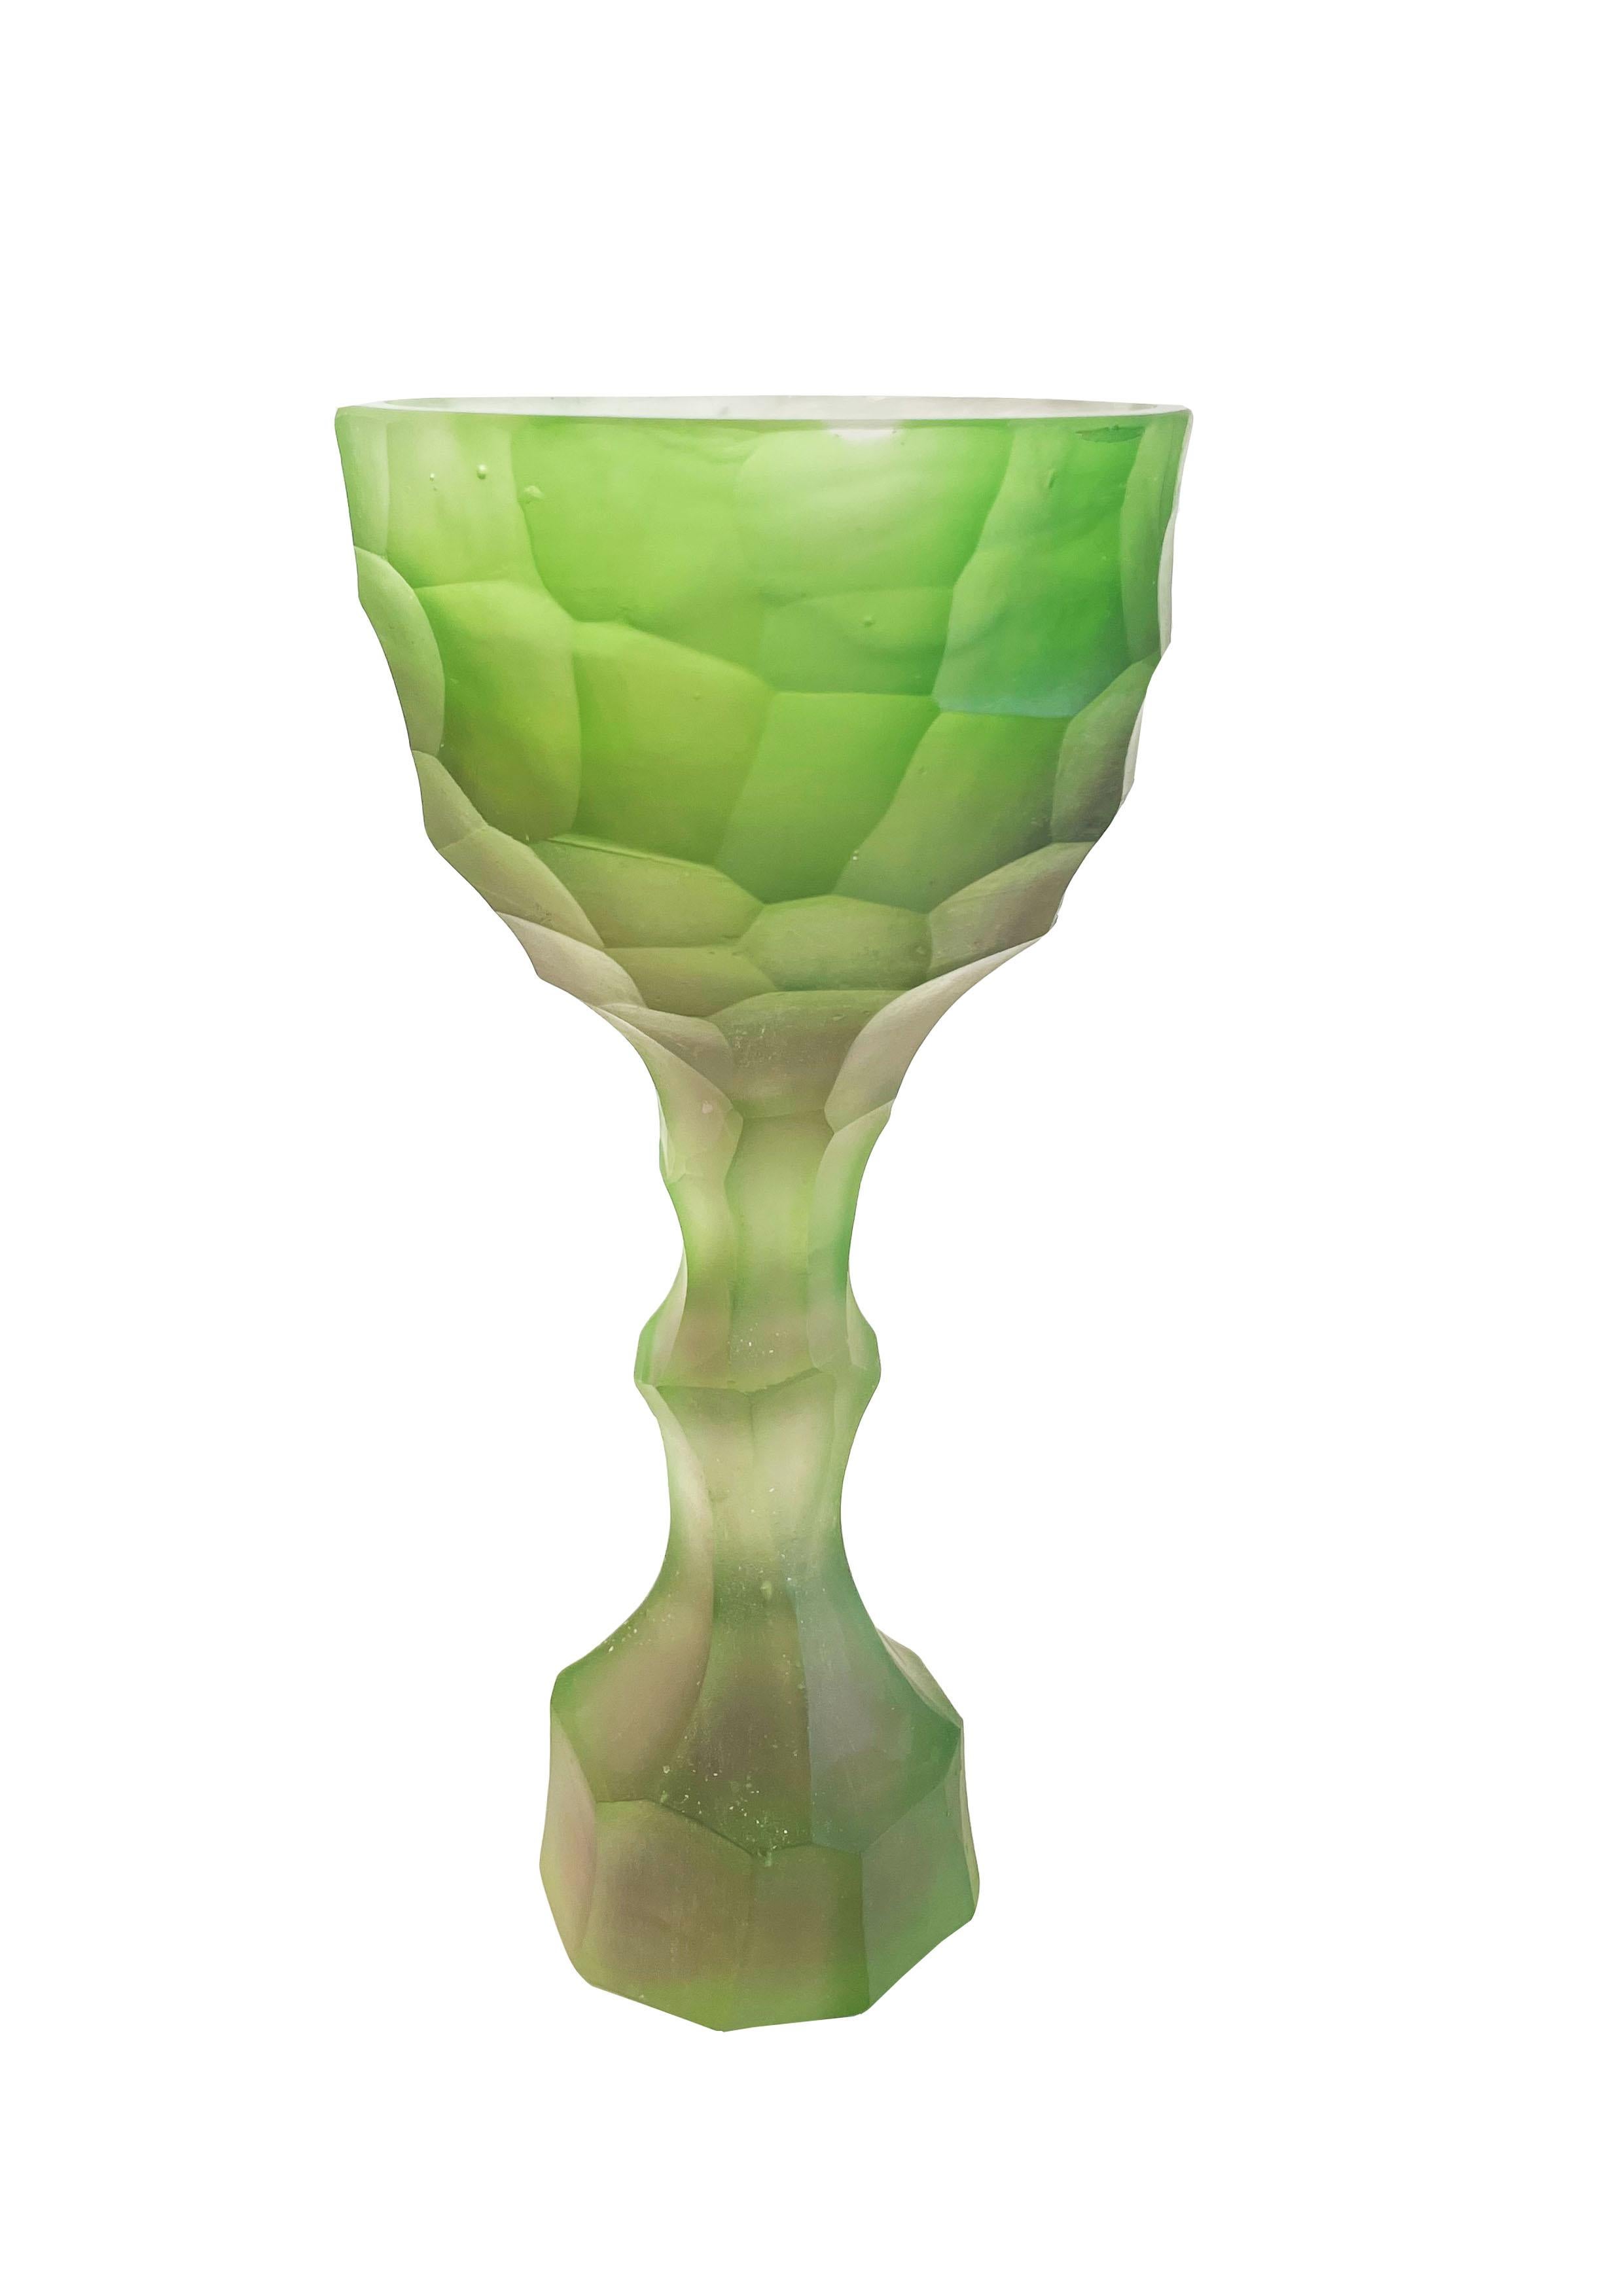 Crystal Contemporary and Light Green Glass Casted Stone Age Goblets by Alissa Volchkova For Sale